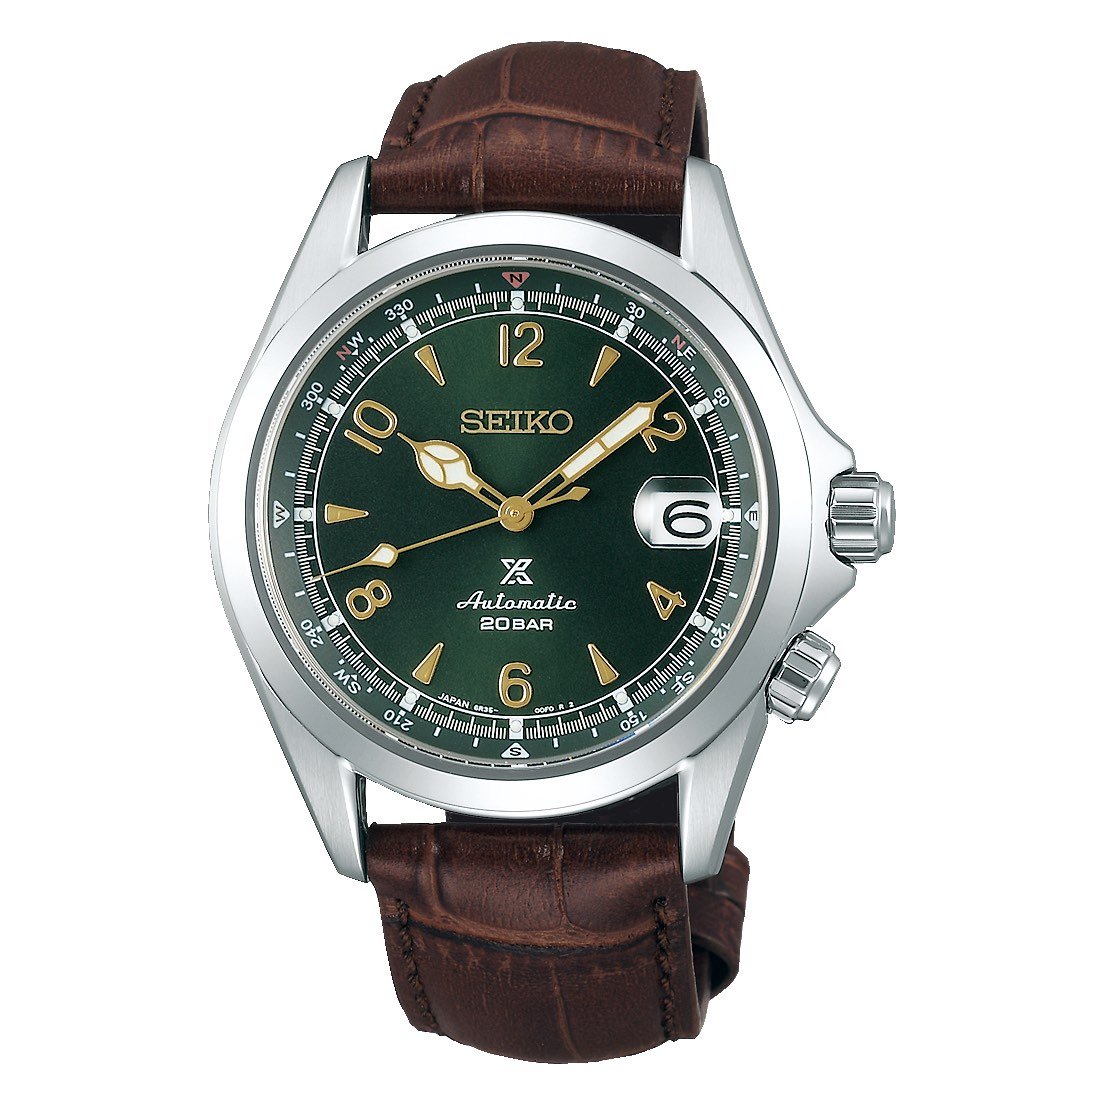 The Seiko Alpinist SPB121J1 currently in collection